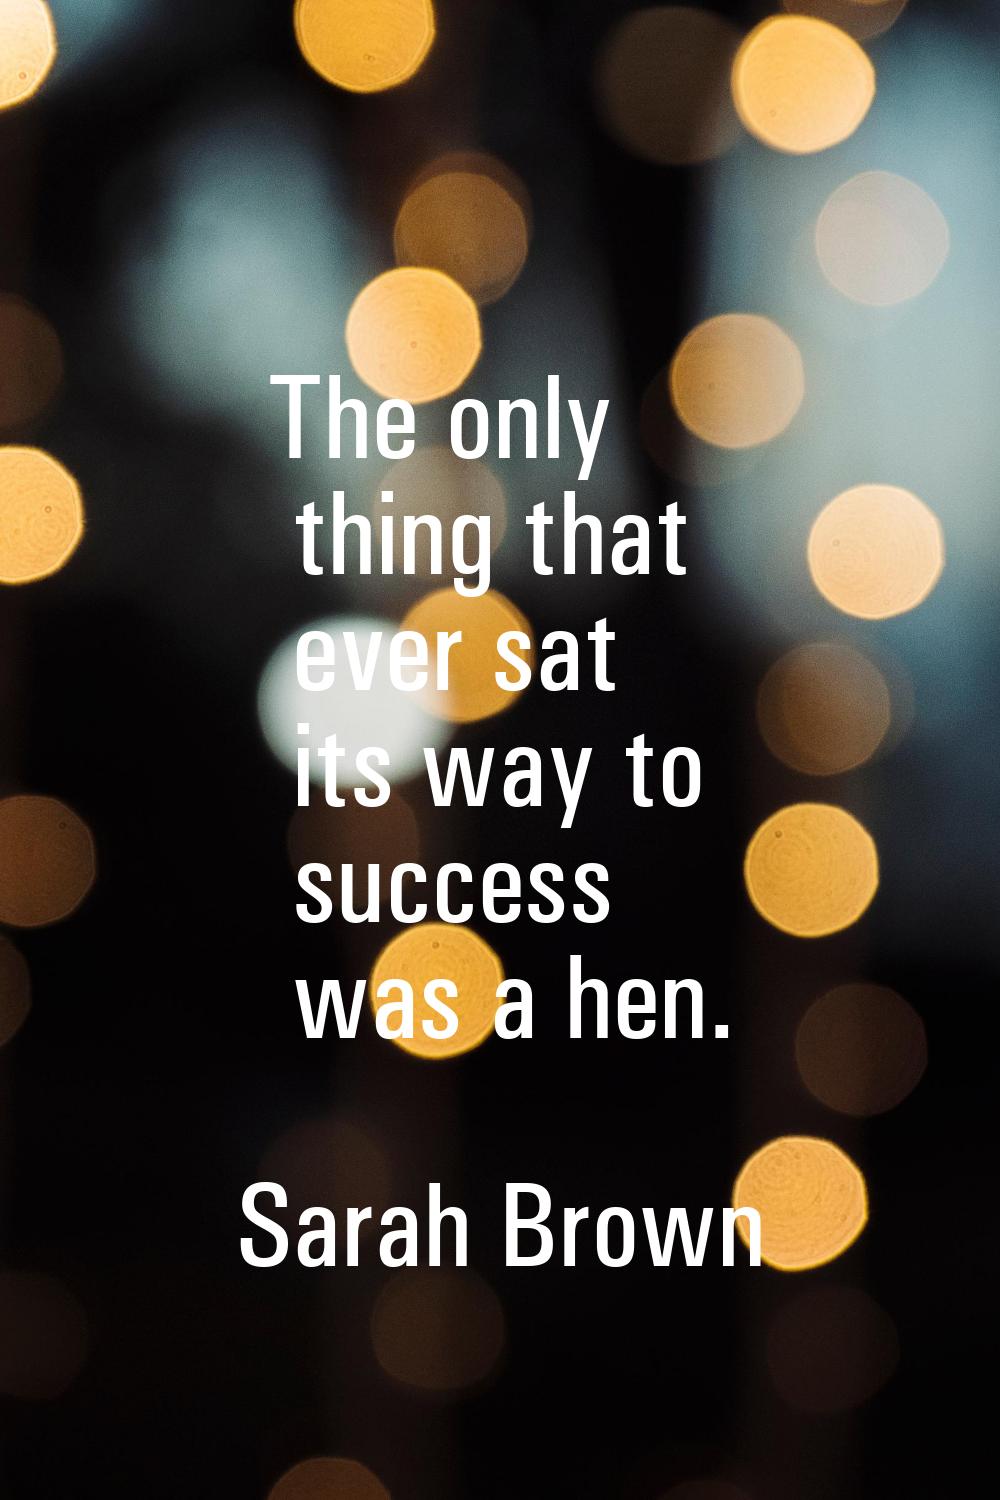 The only thing that ever sat its way to success was a hen.